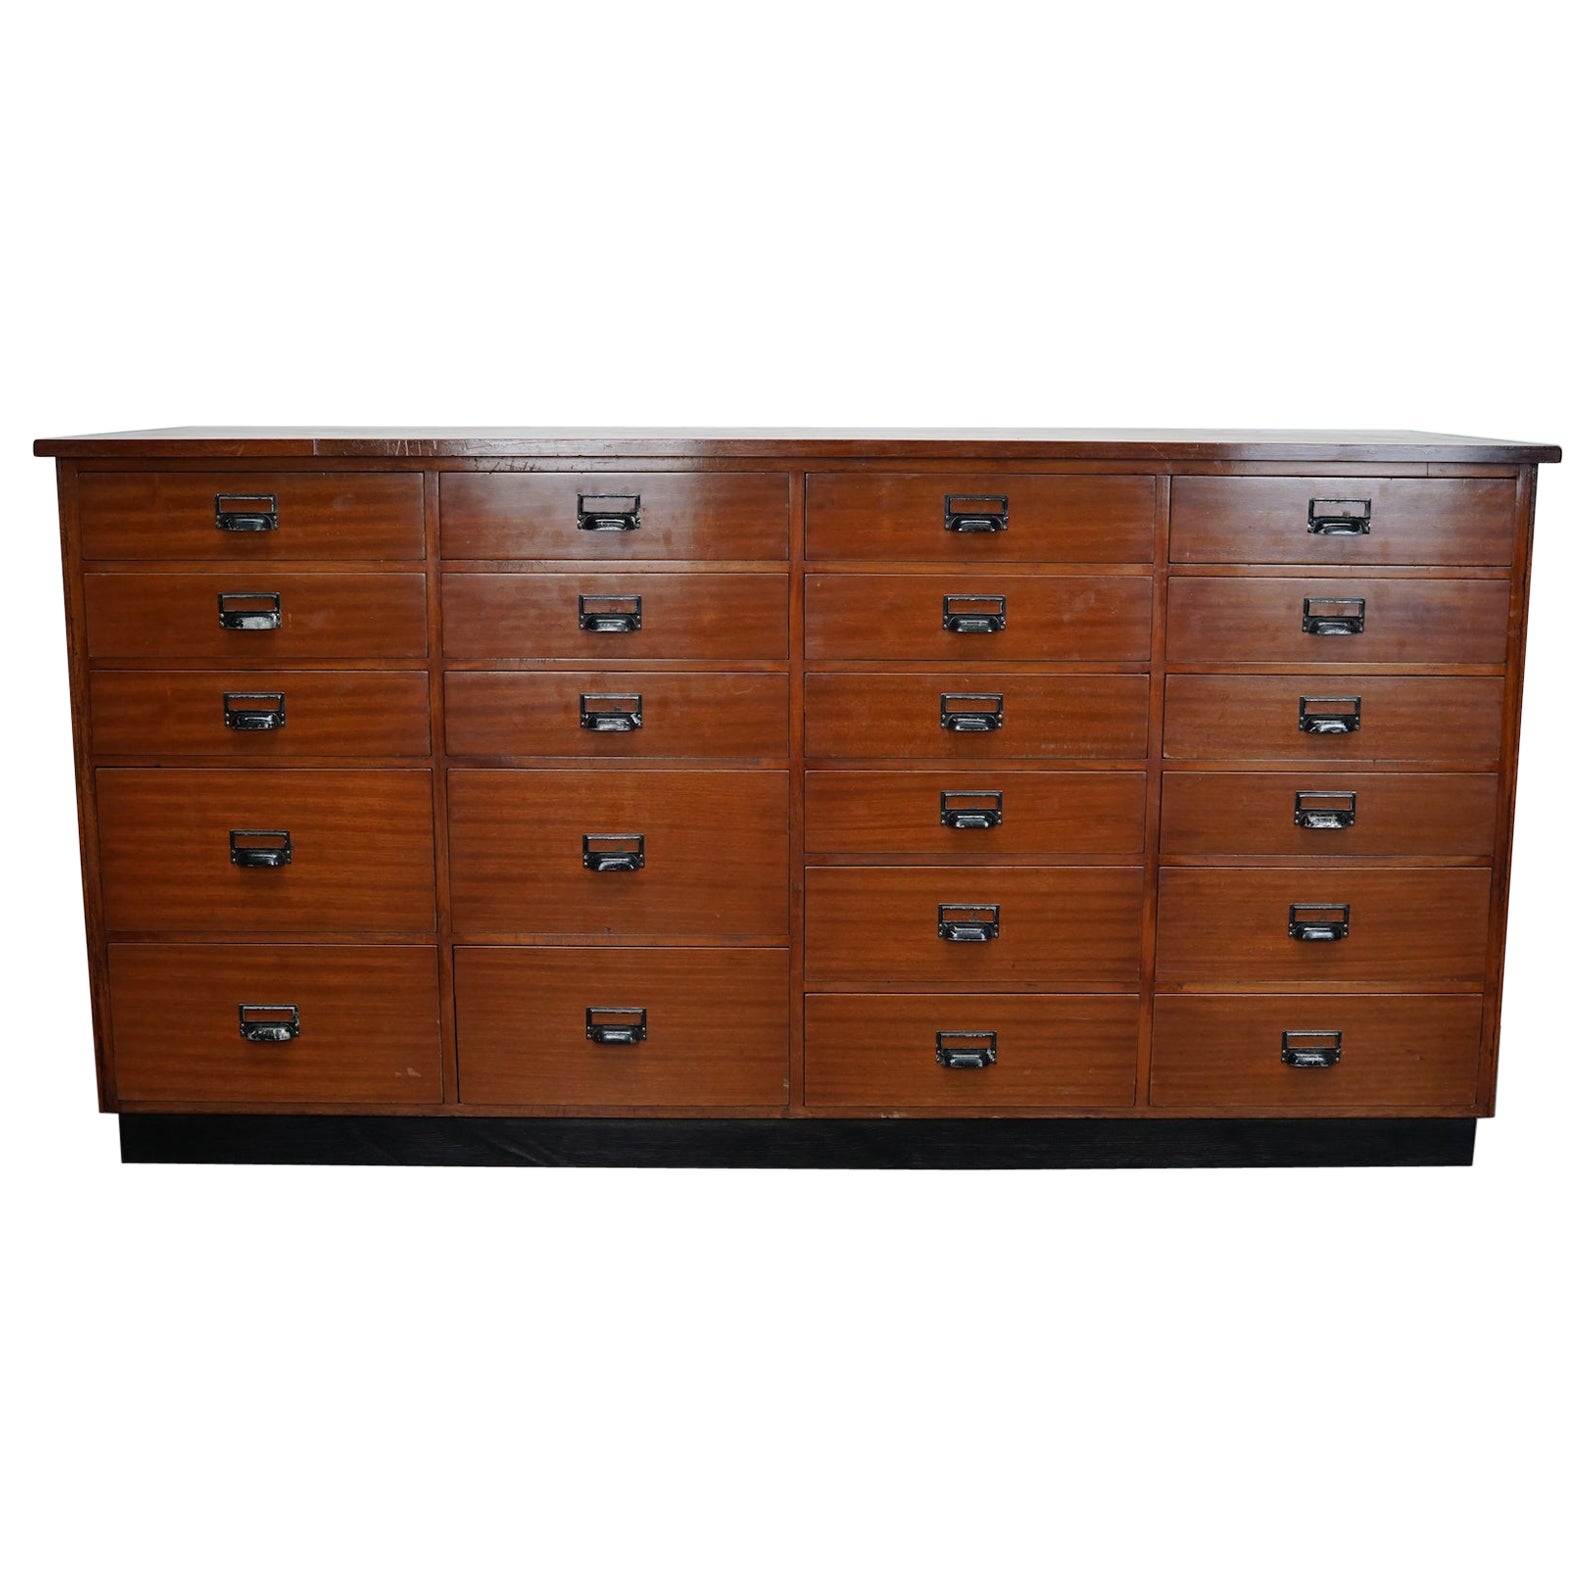  Dutch Industrial Mahogany Apothecary Cabinet, Mid-20th Century For Sale